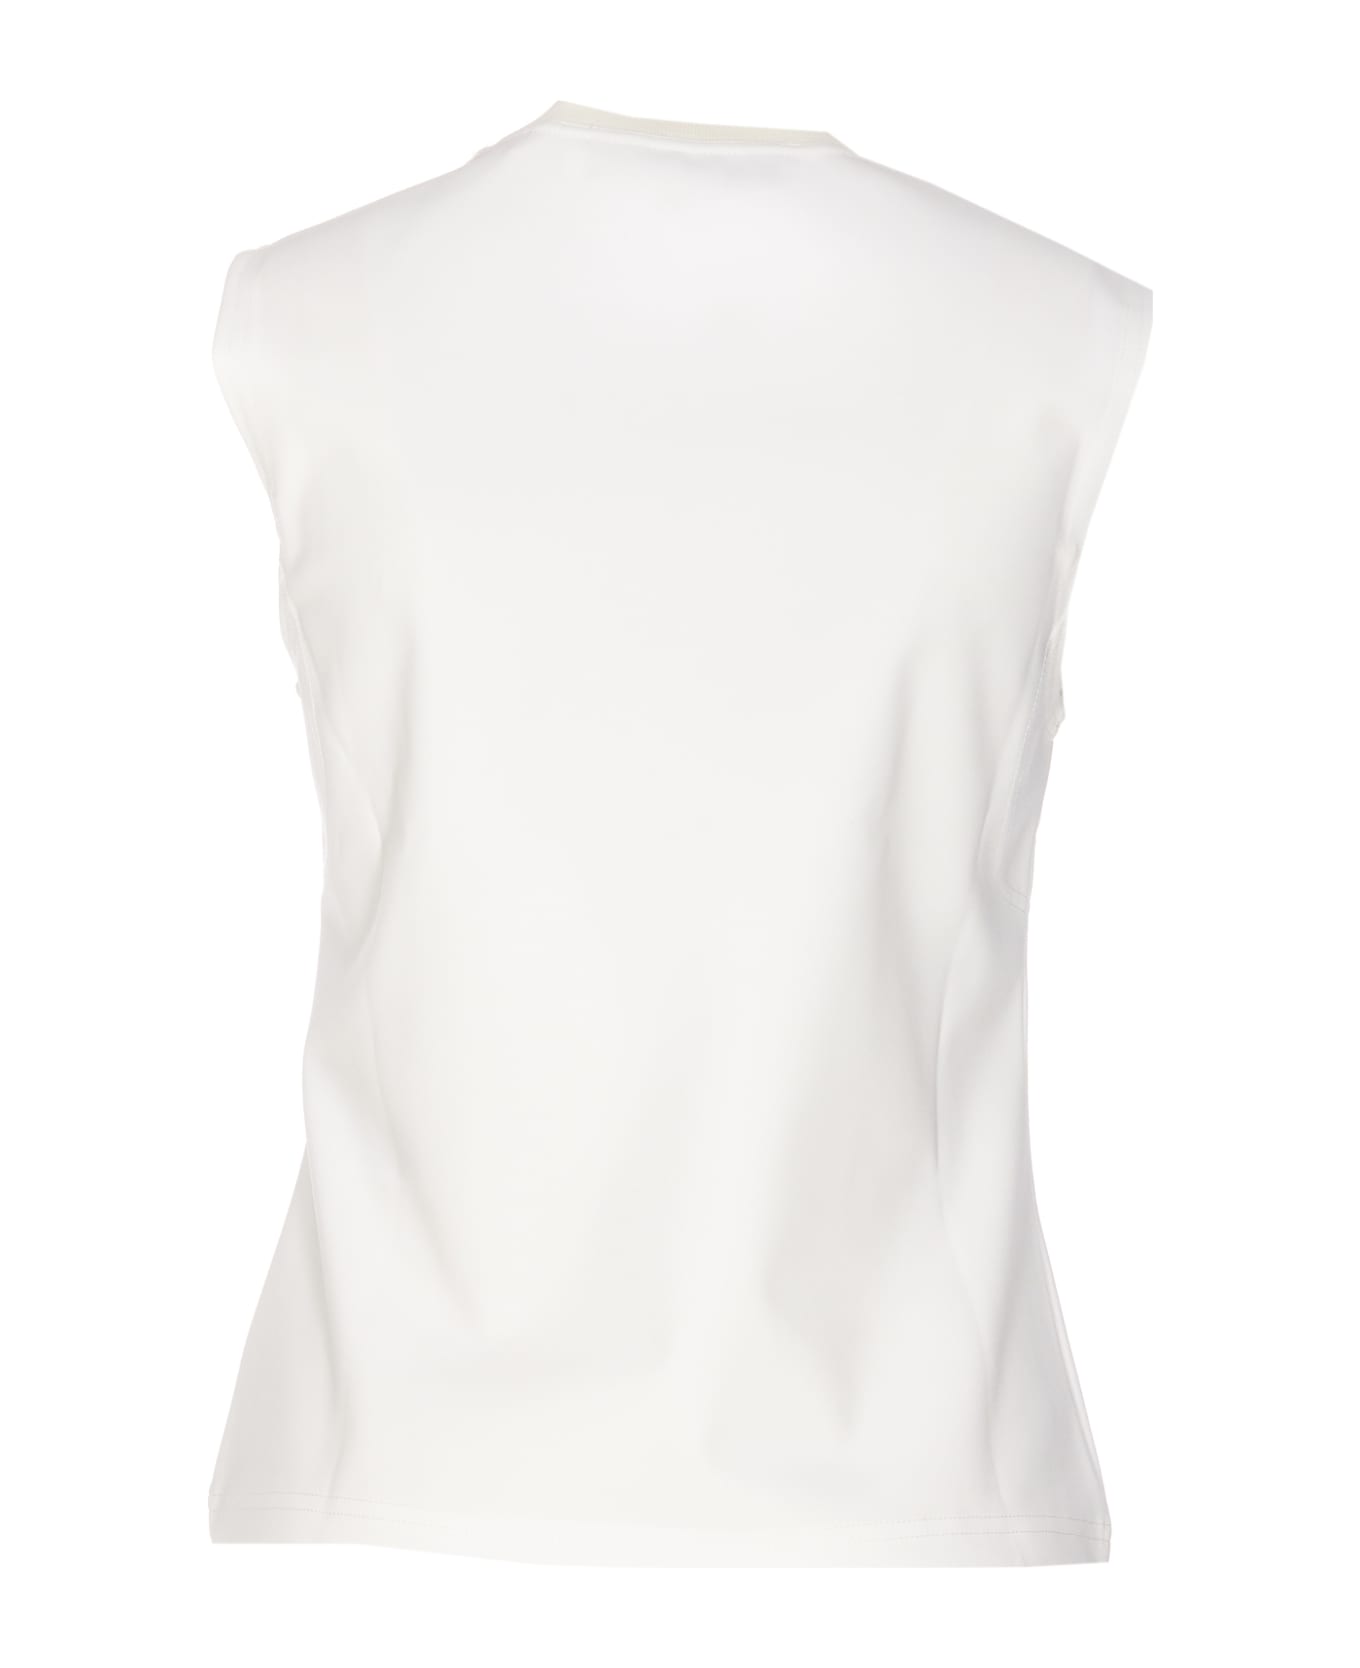 J.W. Anderson Embroidered Jwa Logo Tank Top - White タンクトップ